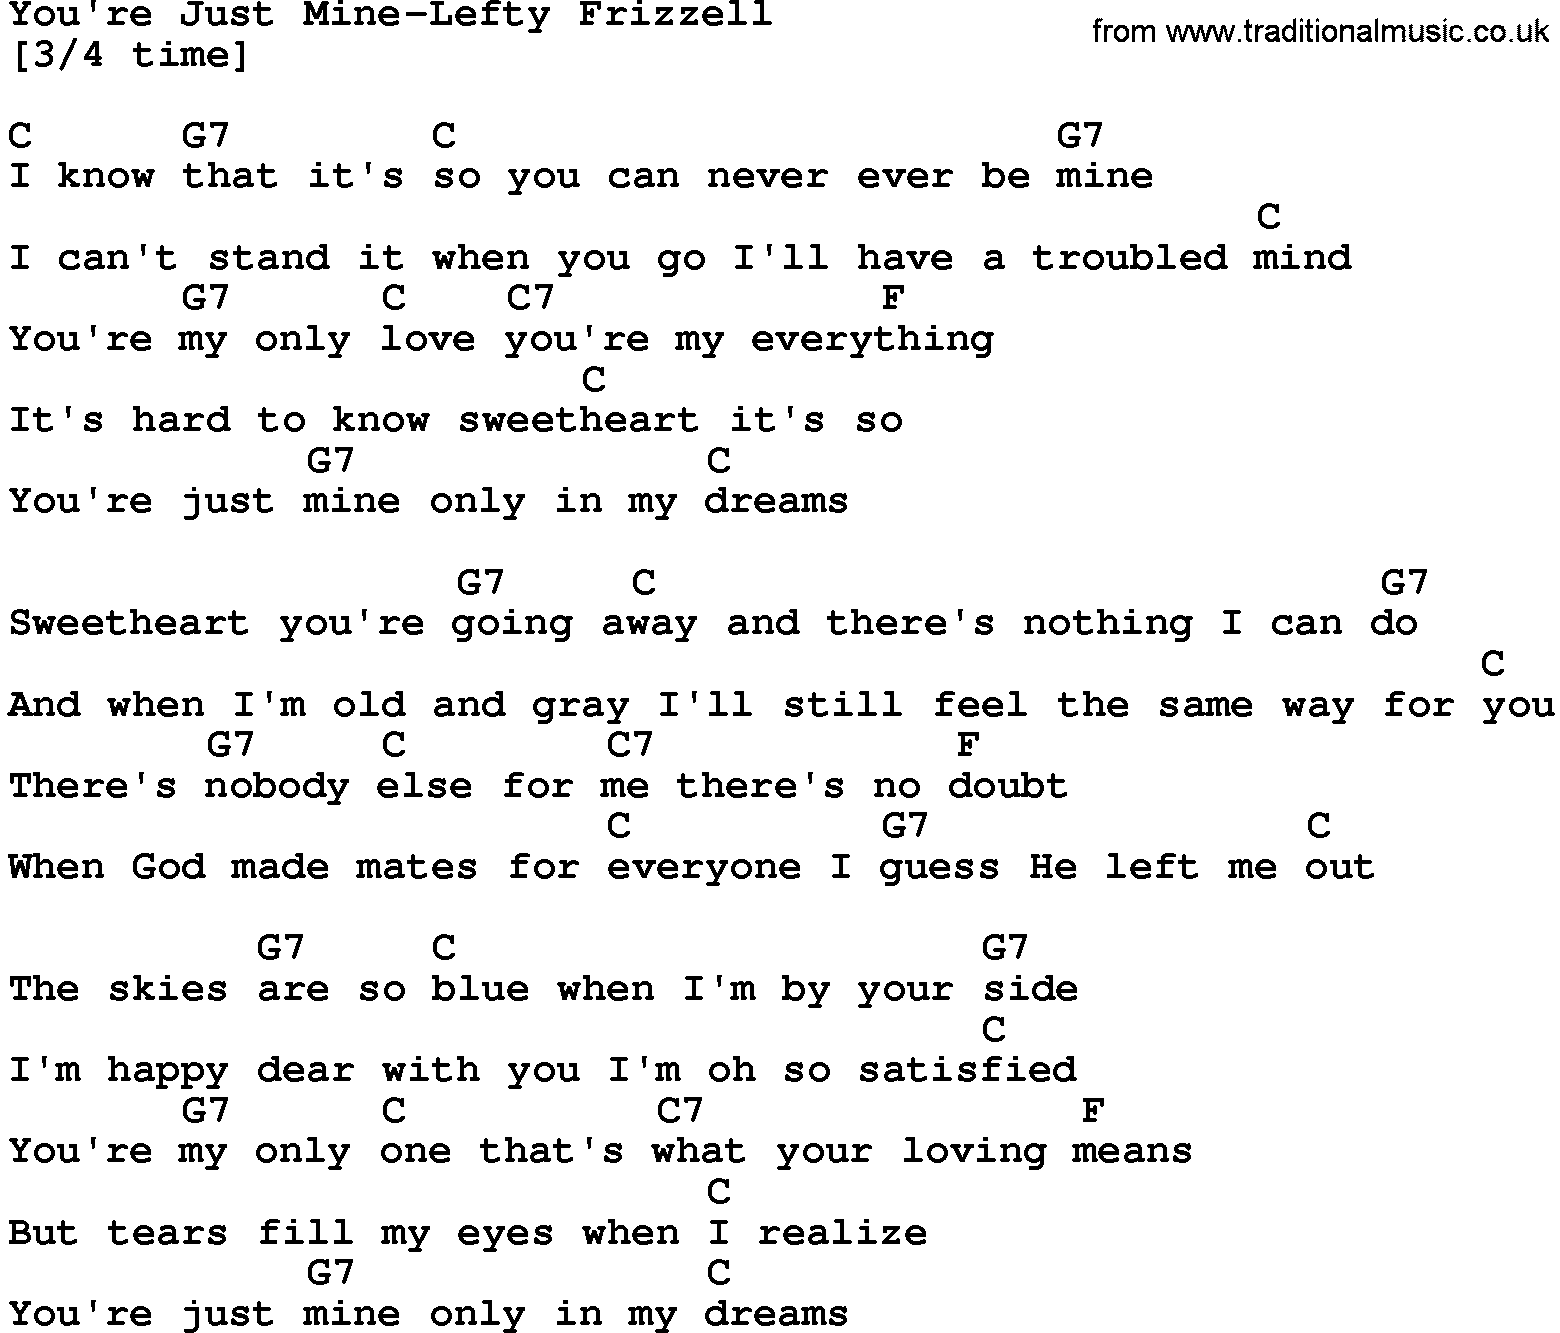 Country music song: You're Just Mine-Lefty Frizzell lyrics and chords